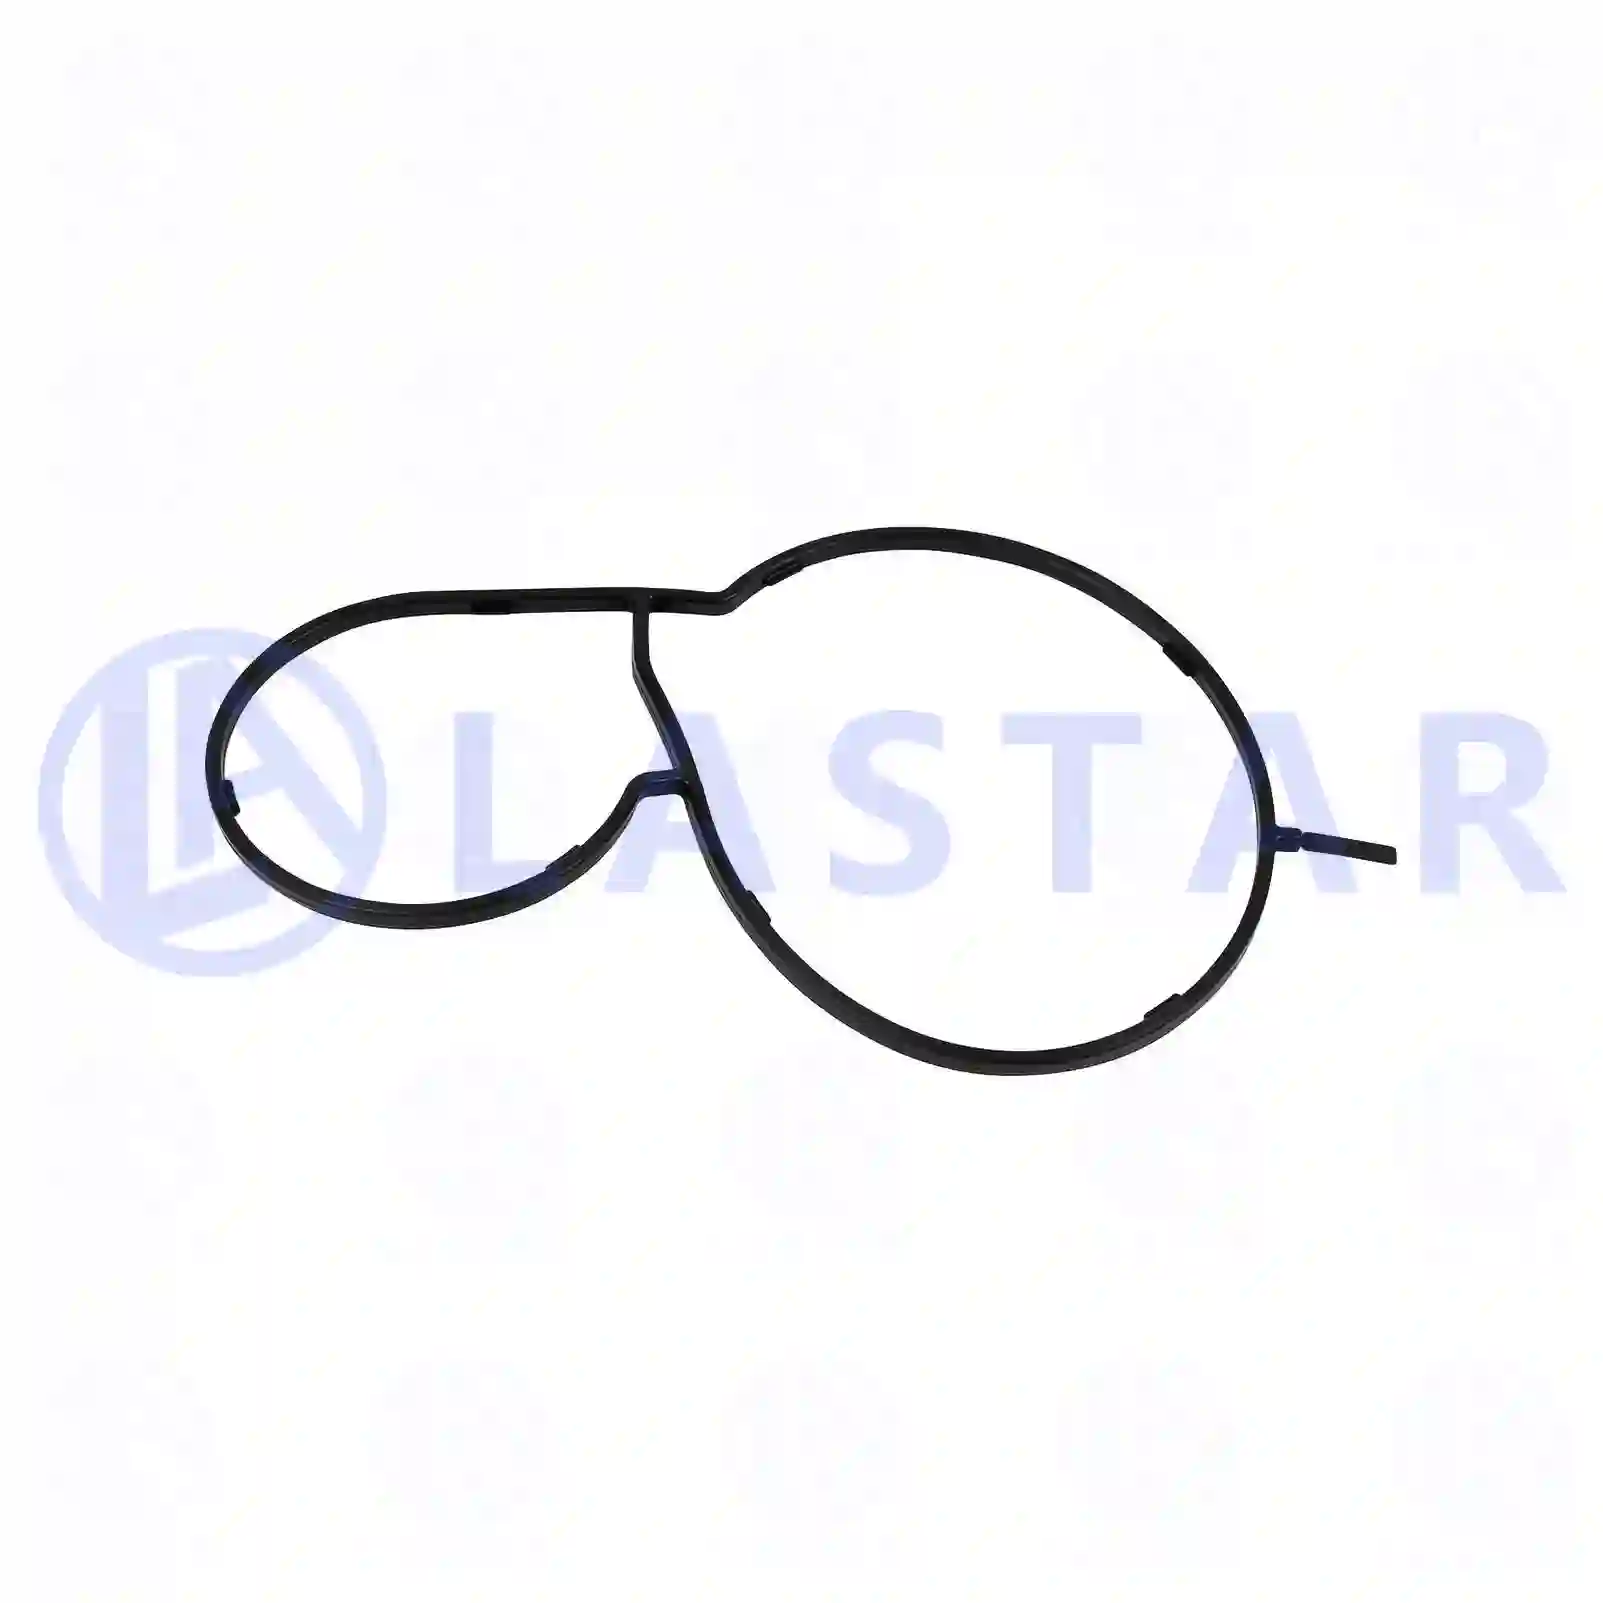  Gasket, planetary gear cylinder || Lastar Spare Part | Truck Spare Parts, Auotomotive Spare Parts